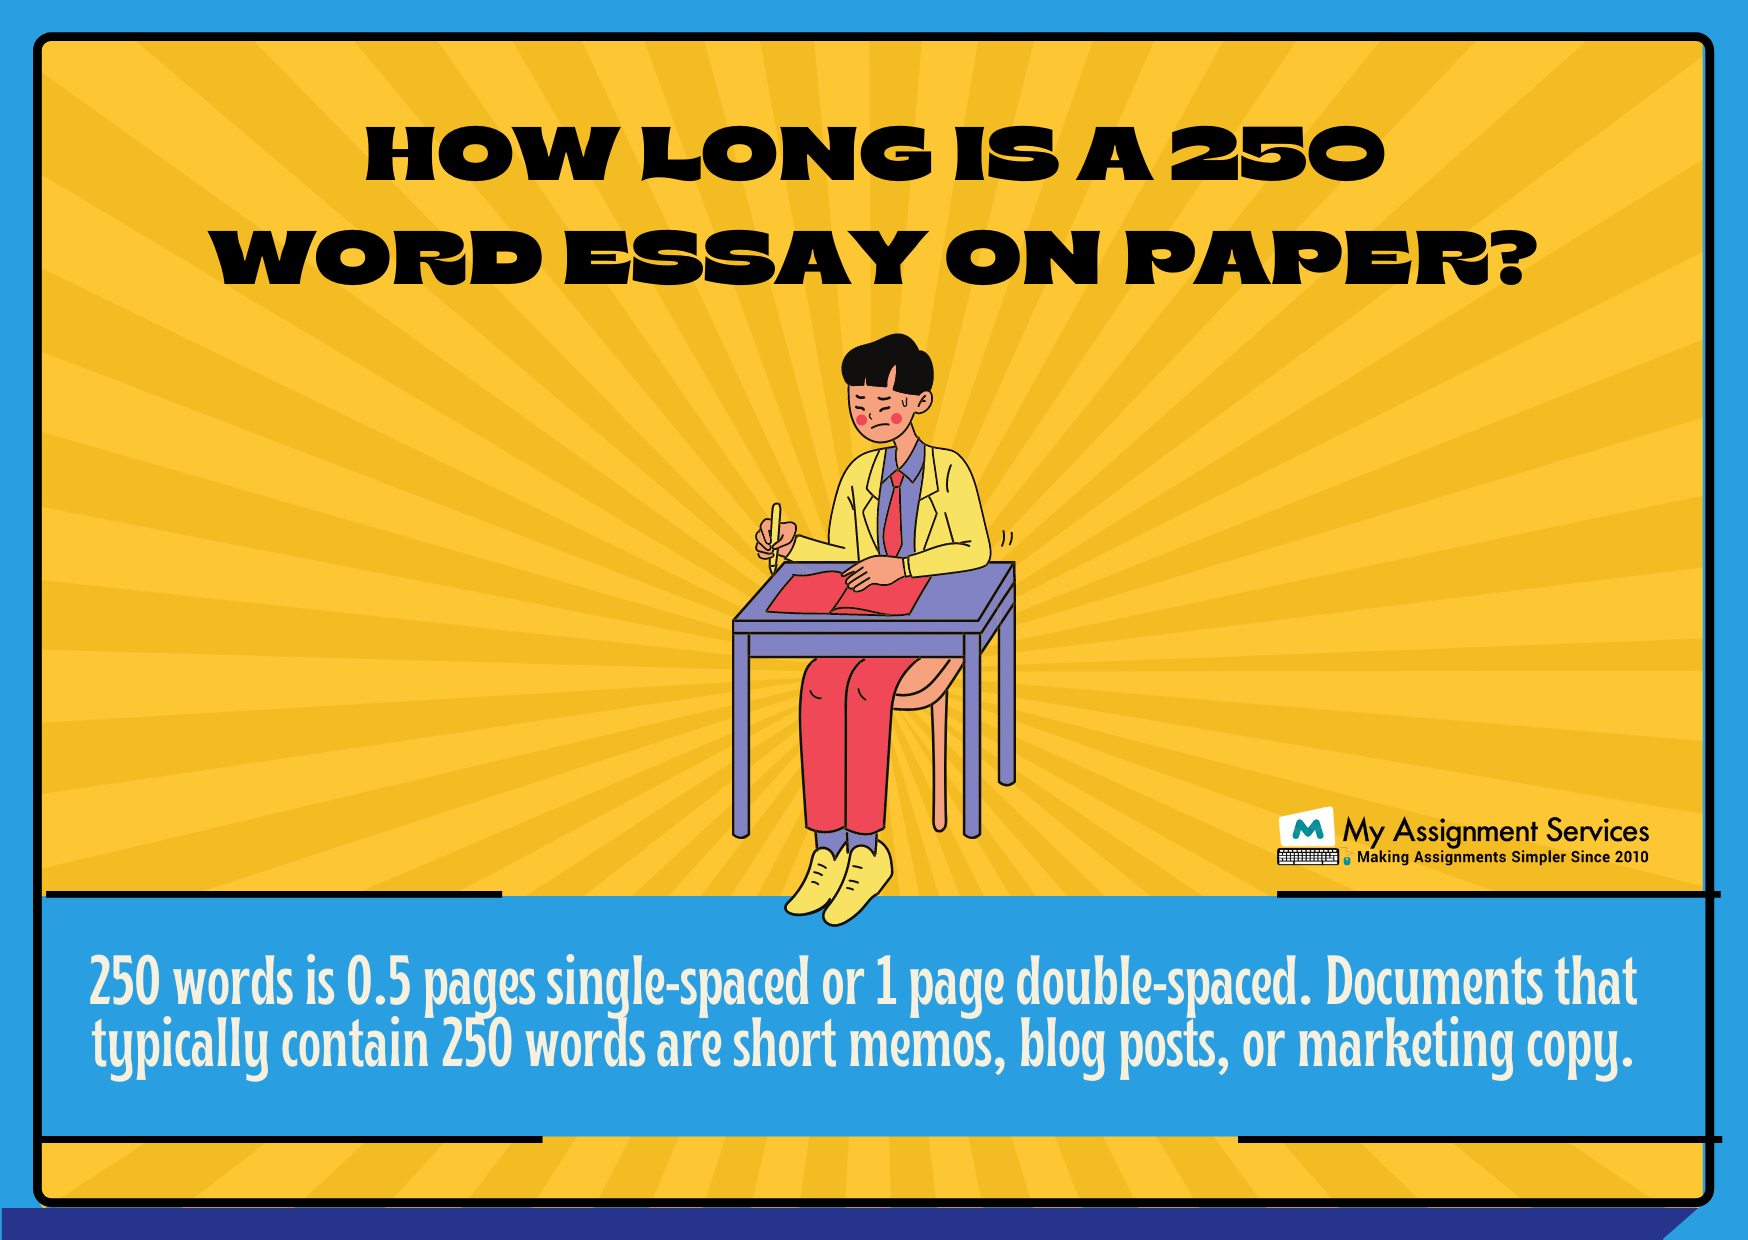 how long is a 250 words essay on paper